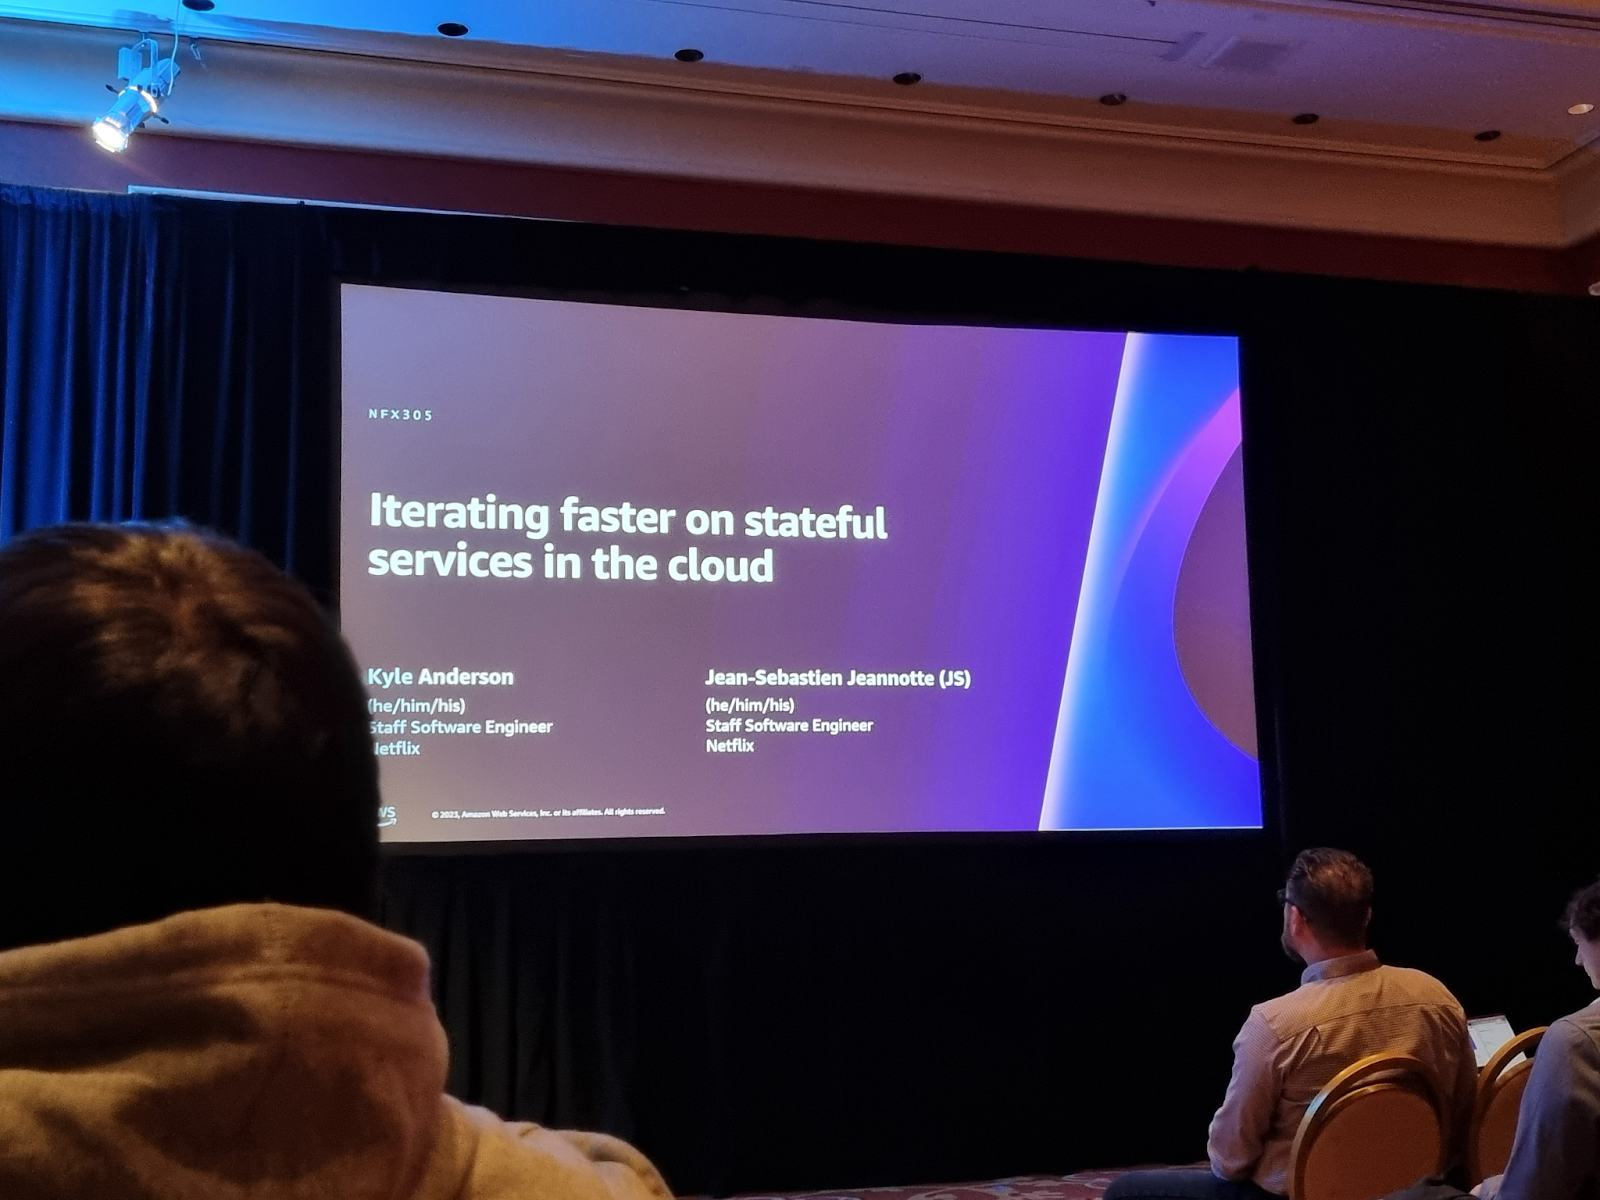 Iterating faster on stateful services in the cloud